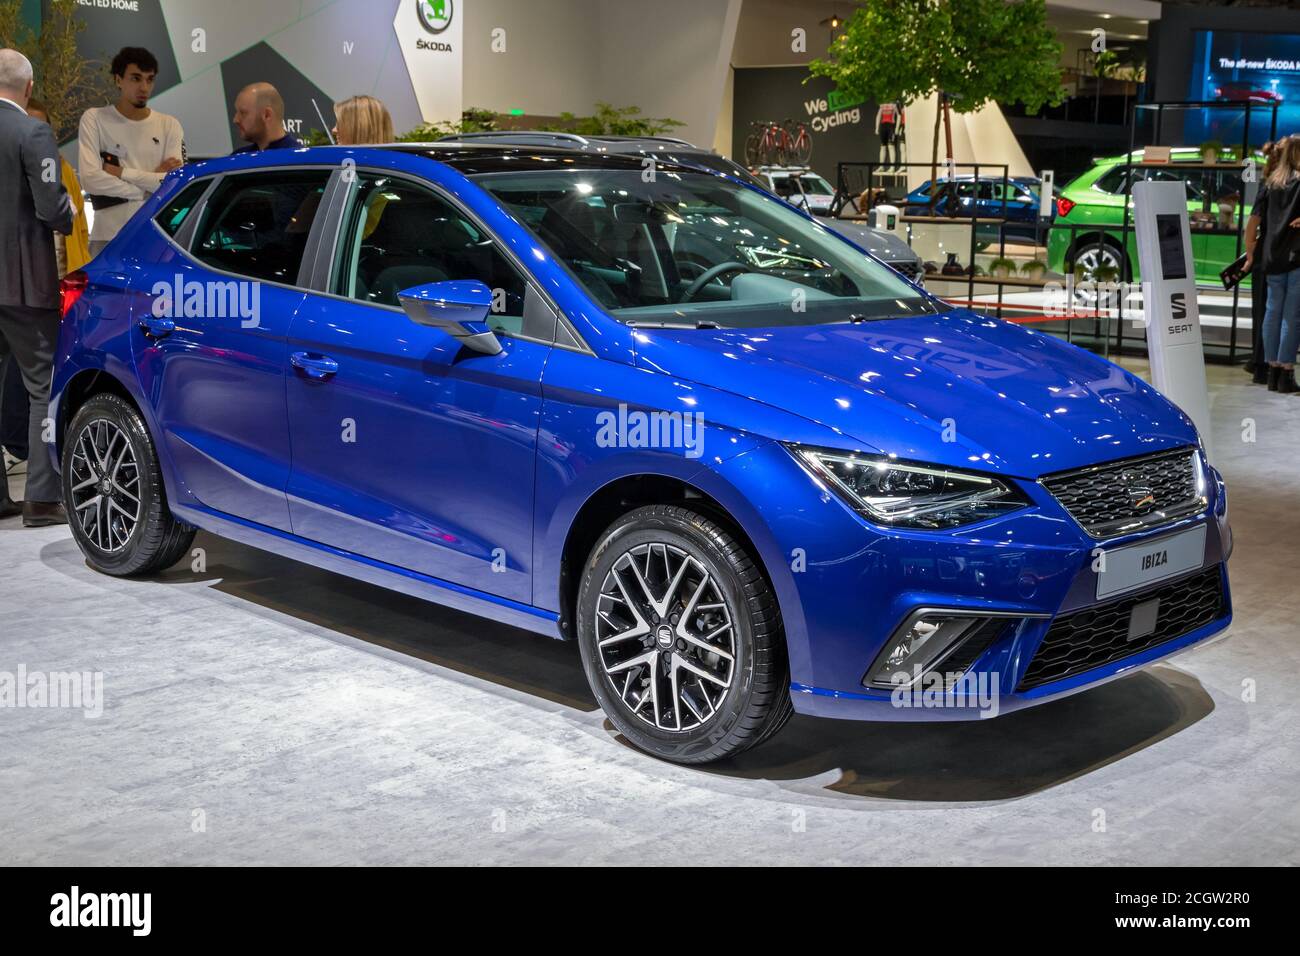 BRUSSELS - JAN 9, 2020: New Seat Ibiza car model showcased at the Brussels Autosalon 2020 Motor Show. Stock Photo